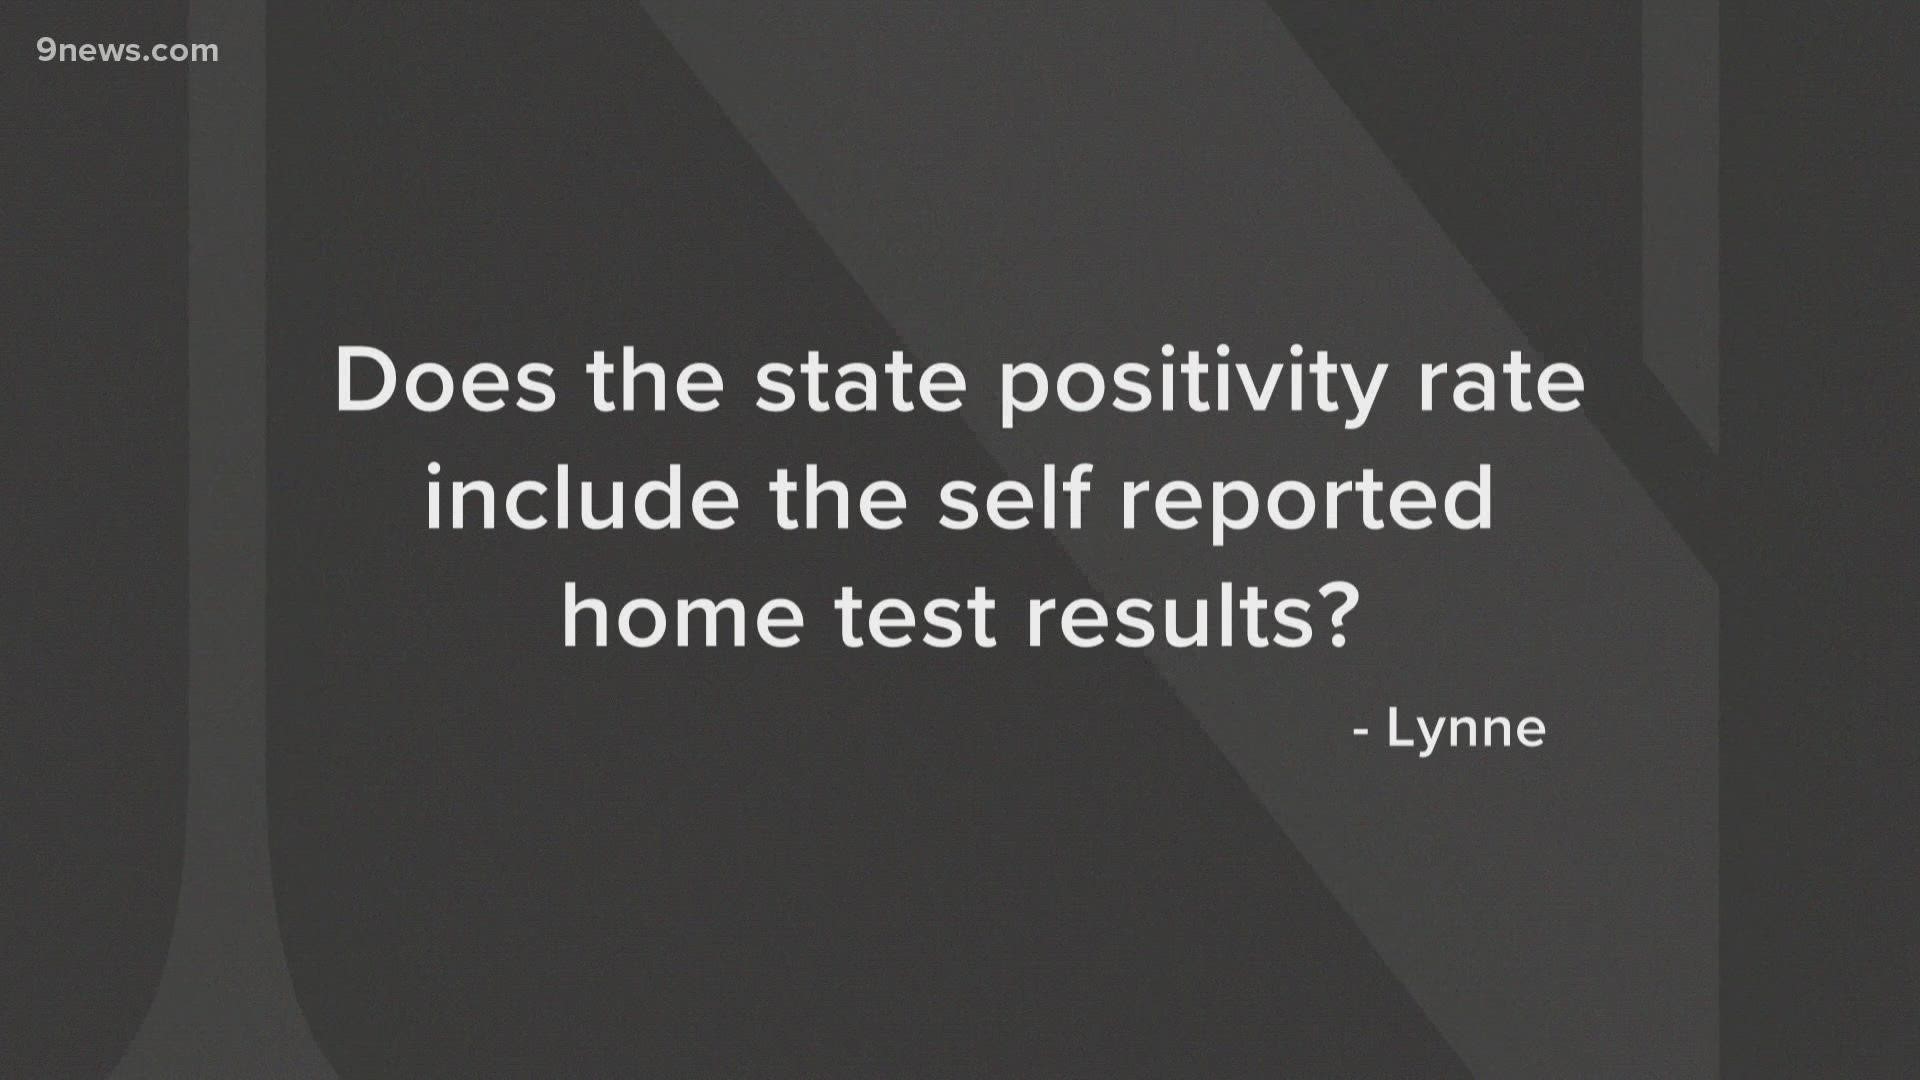 This Next Question comes to us from a viewer named Lynne, curious whether the at-home COVID testing going on around the holidays counts toward the positivity rate.